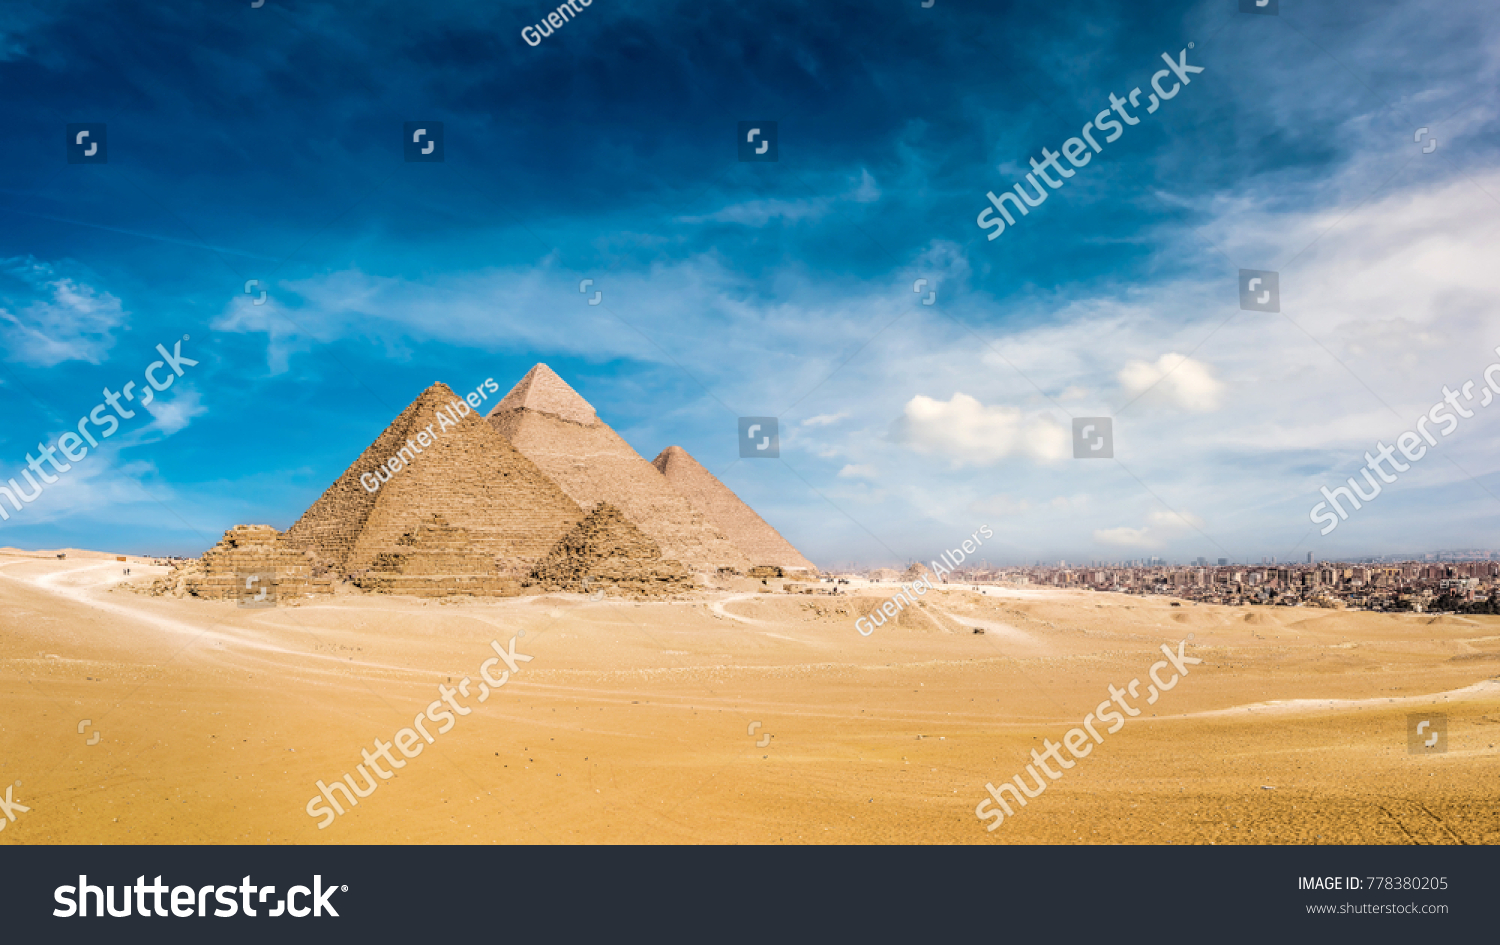 Panorama of the Great Pyramids of Giza, Egypt #778380205